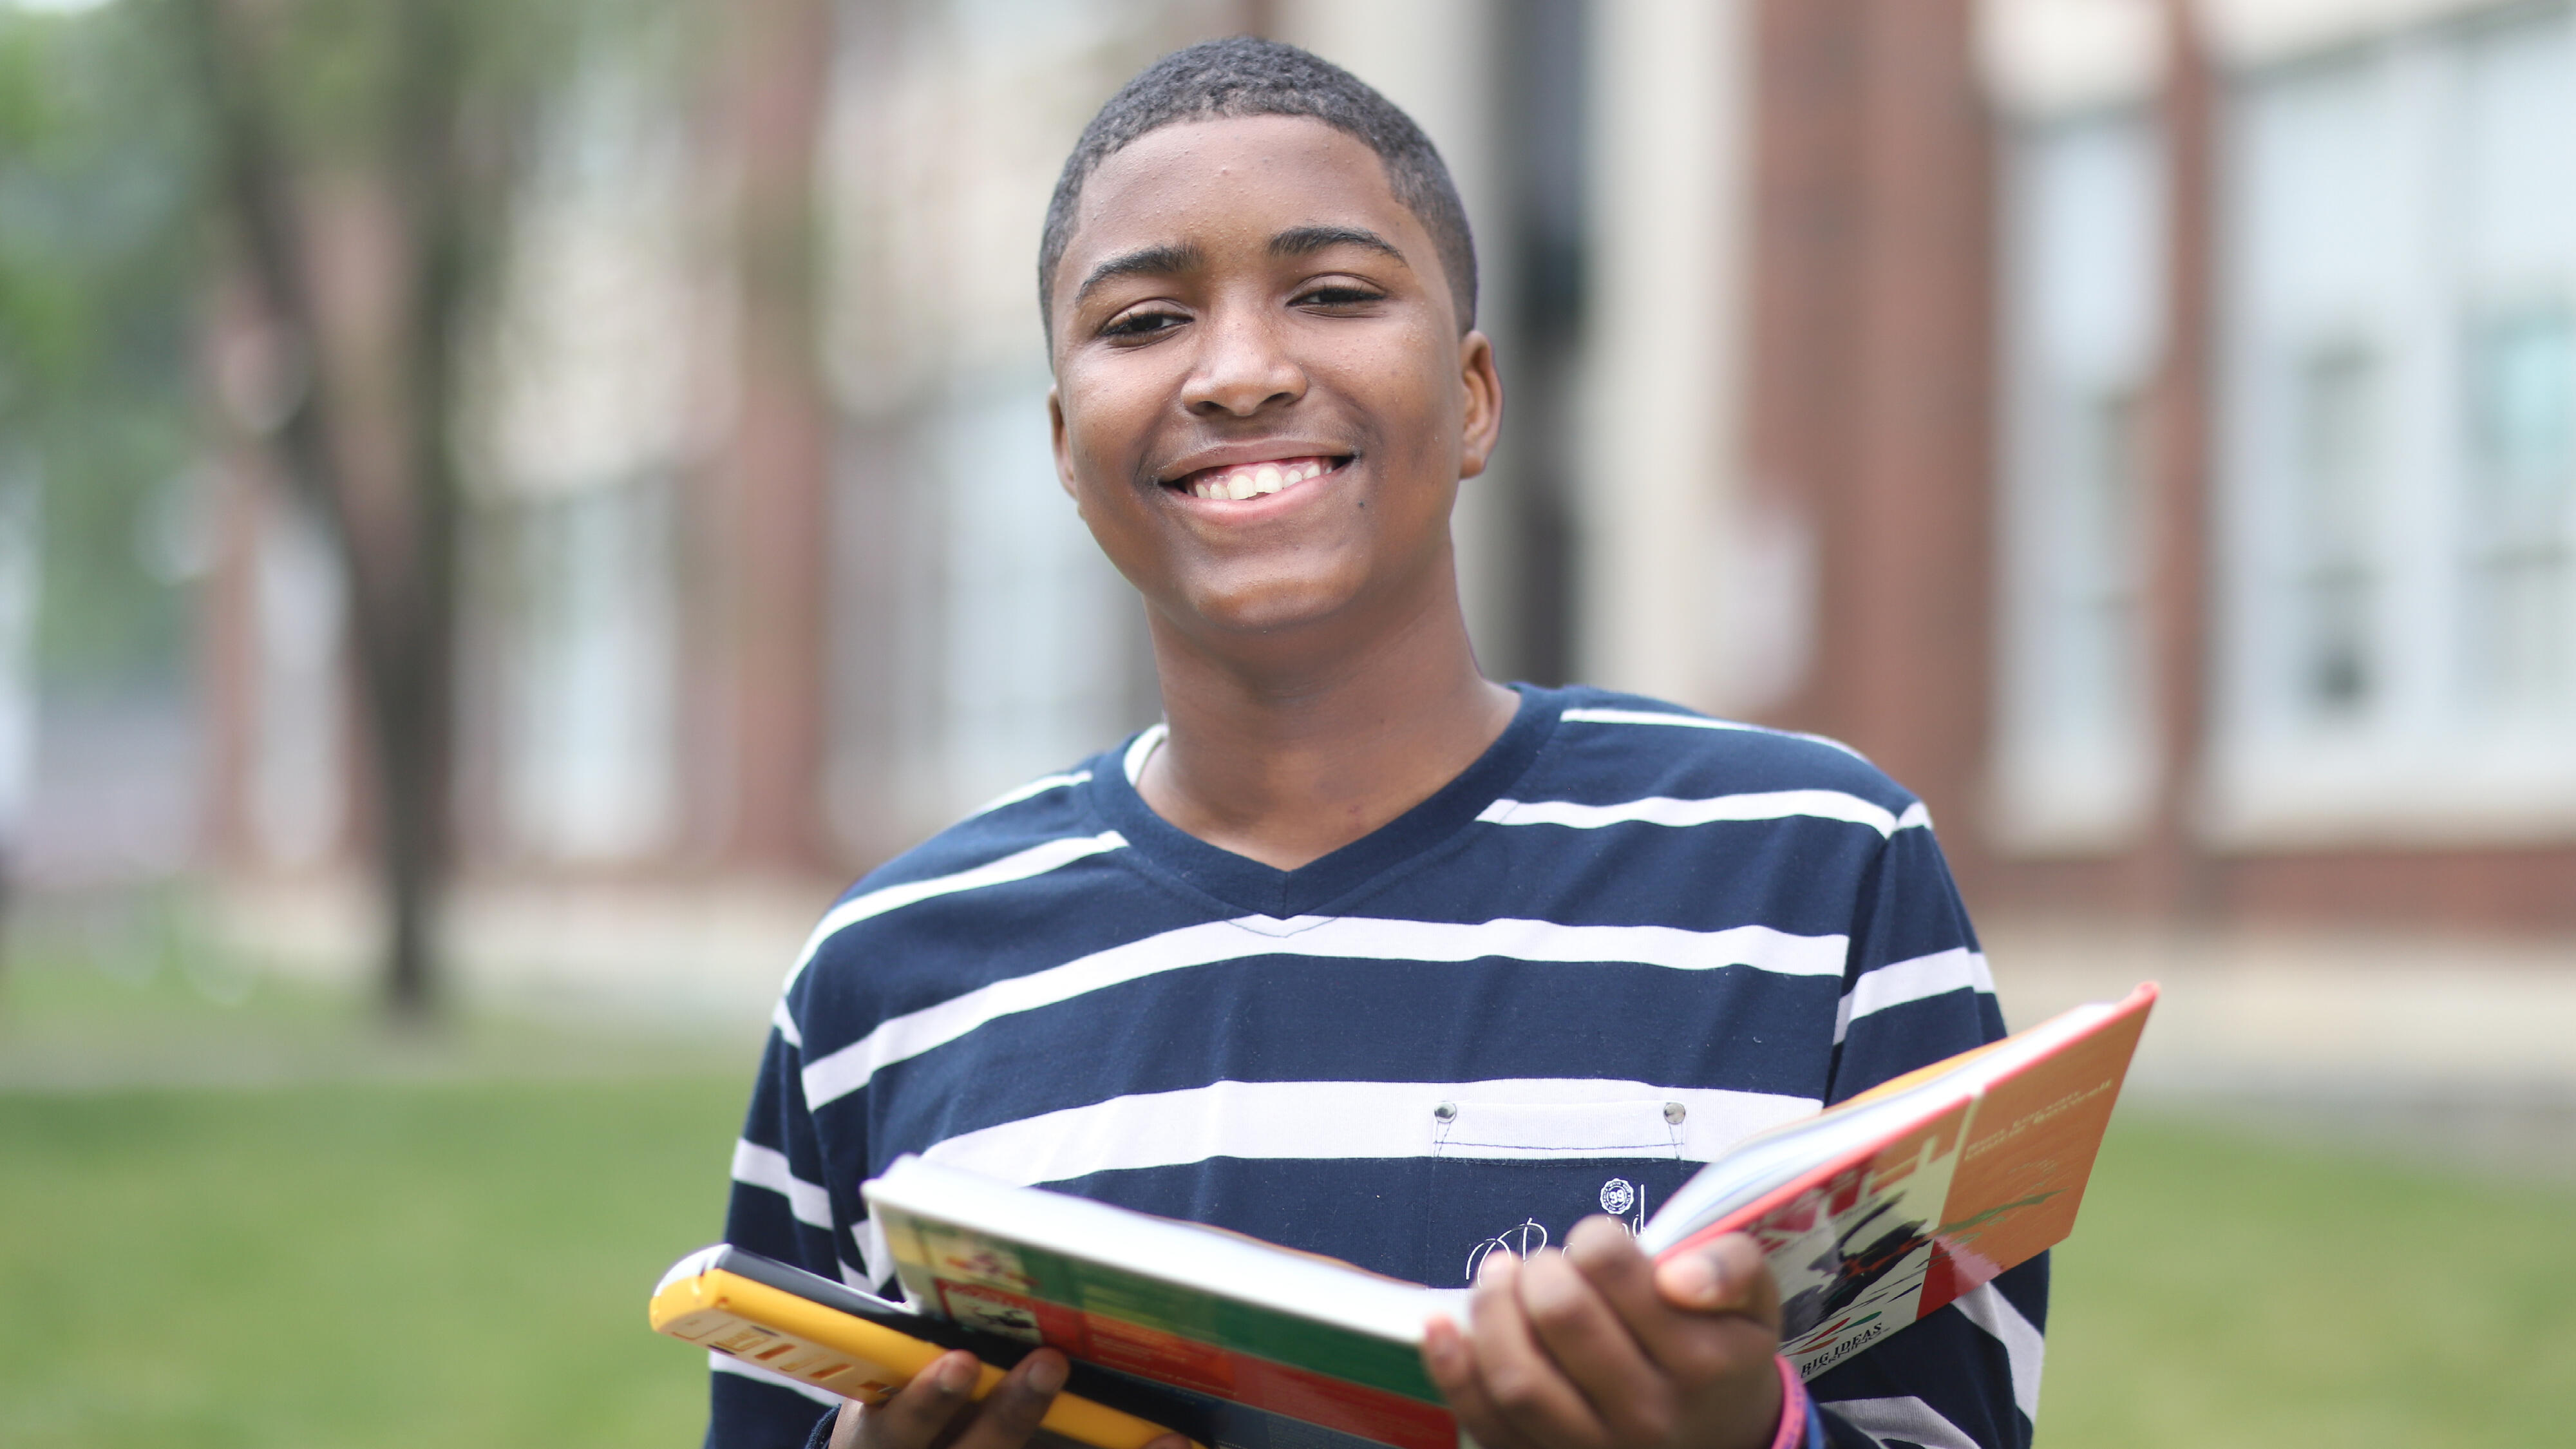 Student smiling while holding a math textbook and calculator